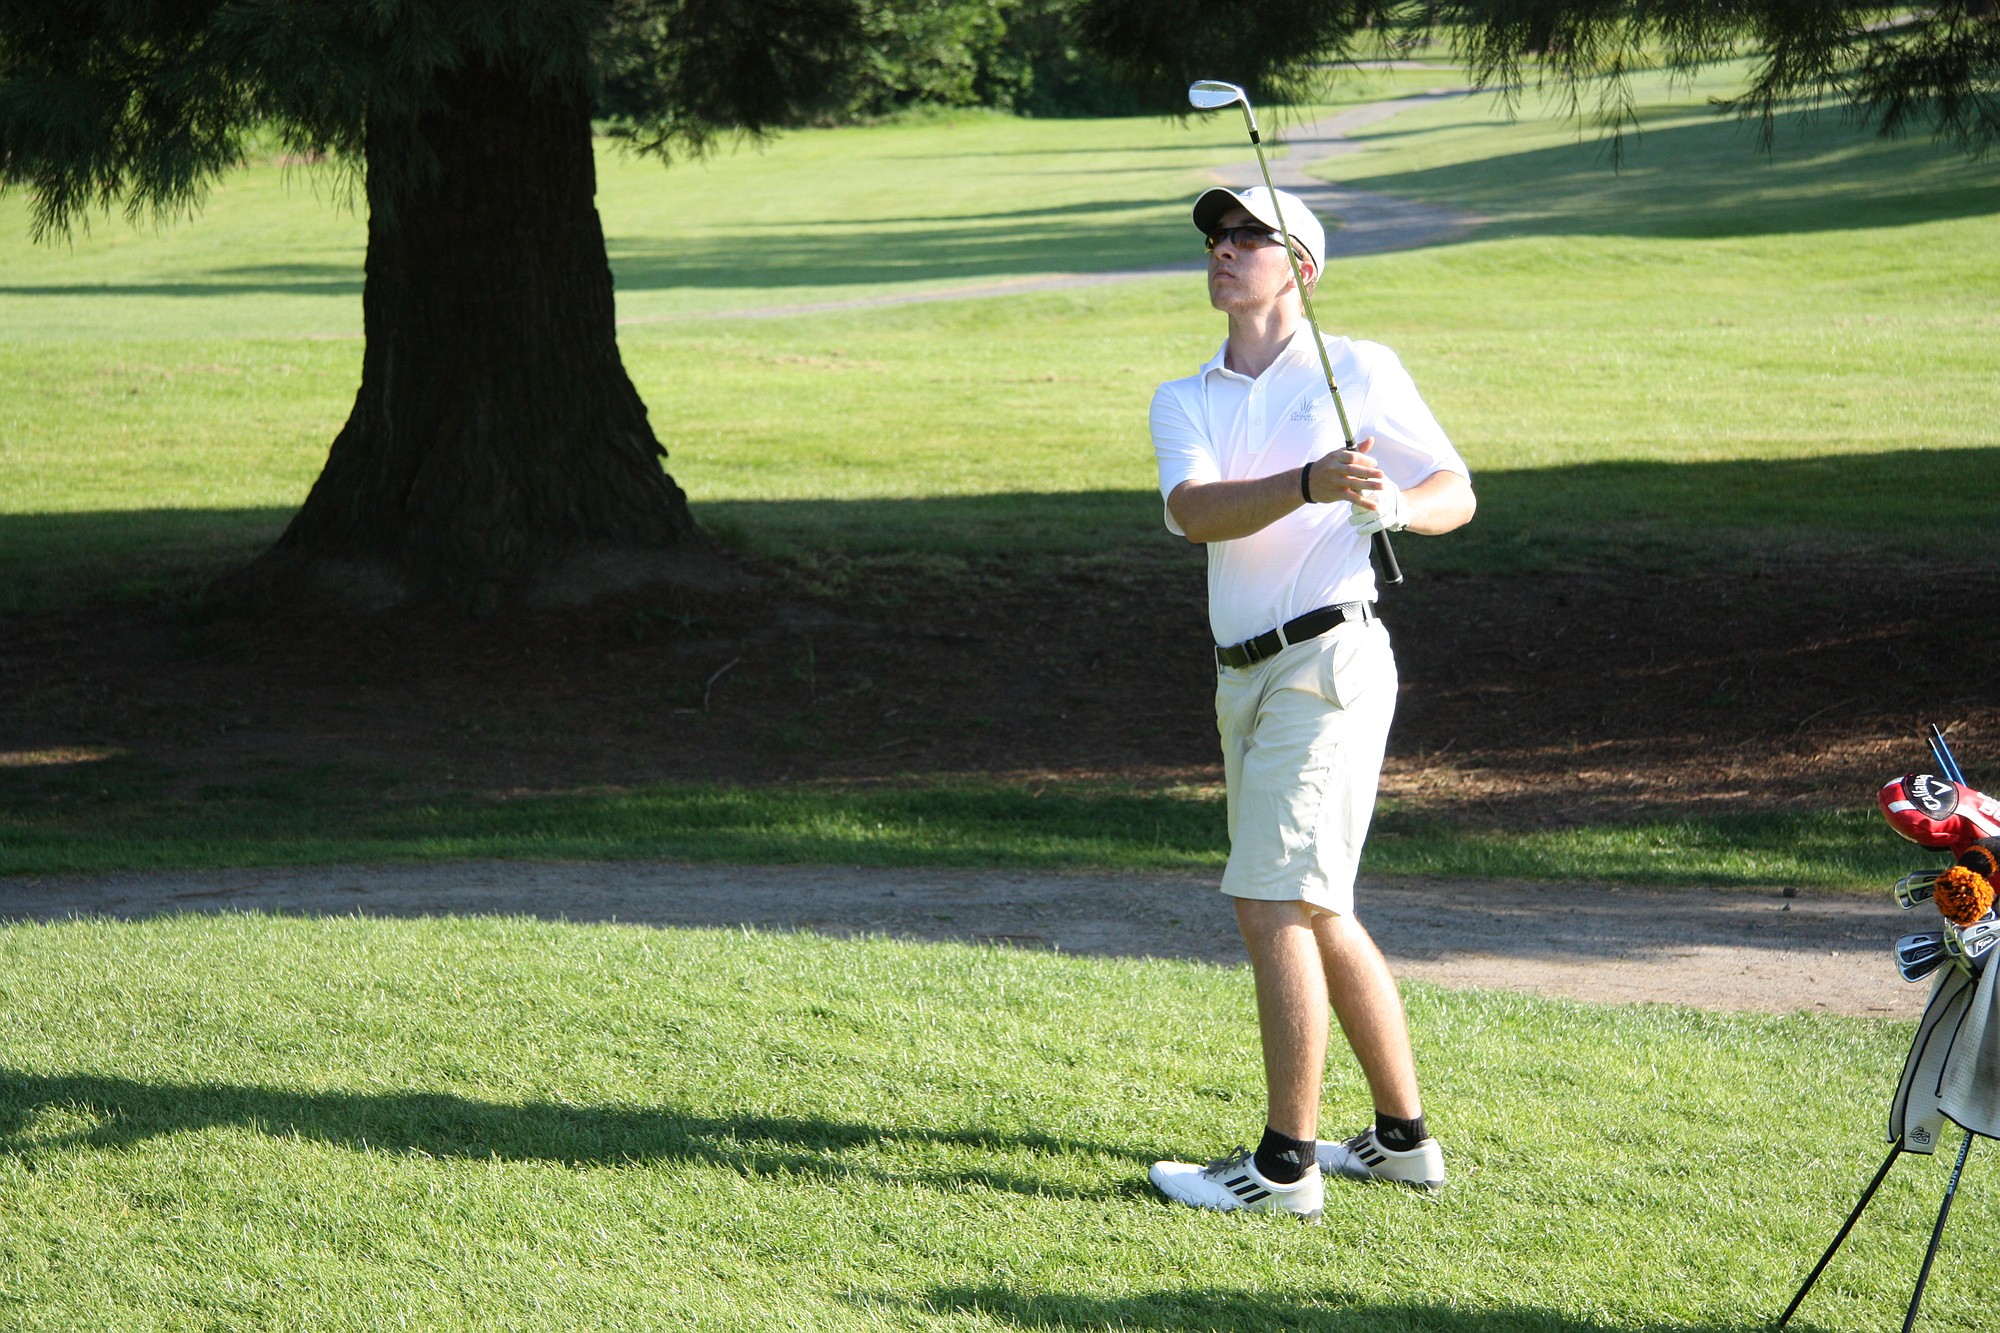 Hudson's Bay senior Landon Joy will compete in the WIAA Class 2A state golf championships later this week.